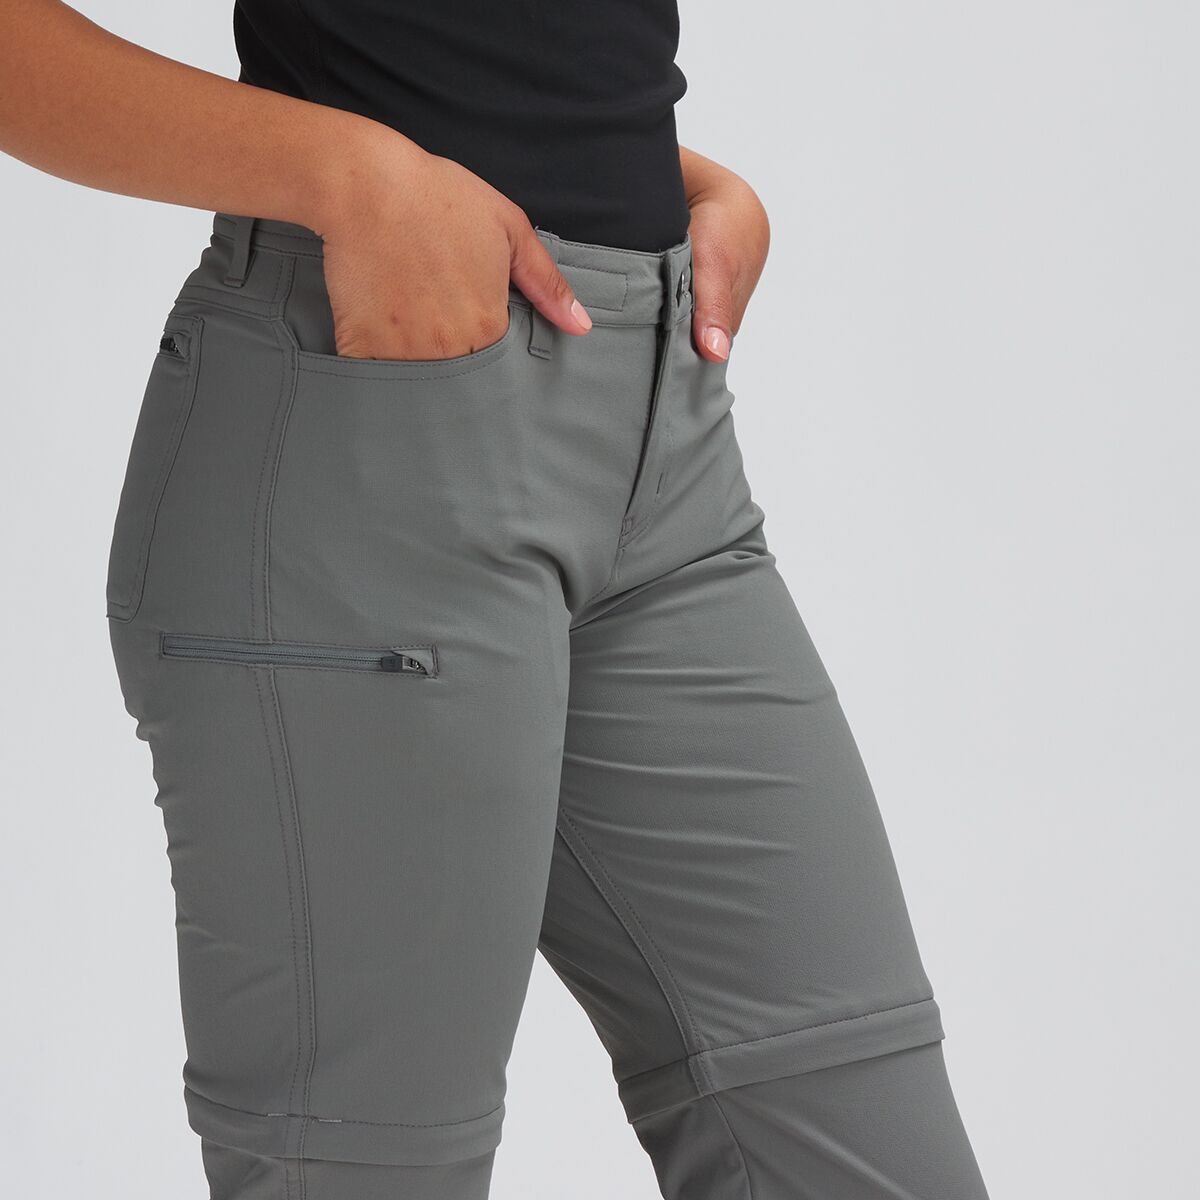 Outdoor Research Ferrosi Convertible Pant - Women's - Clothing